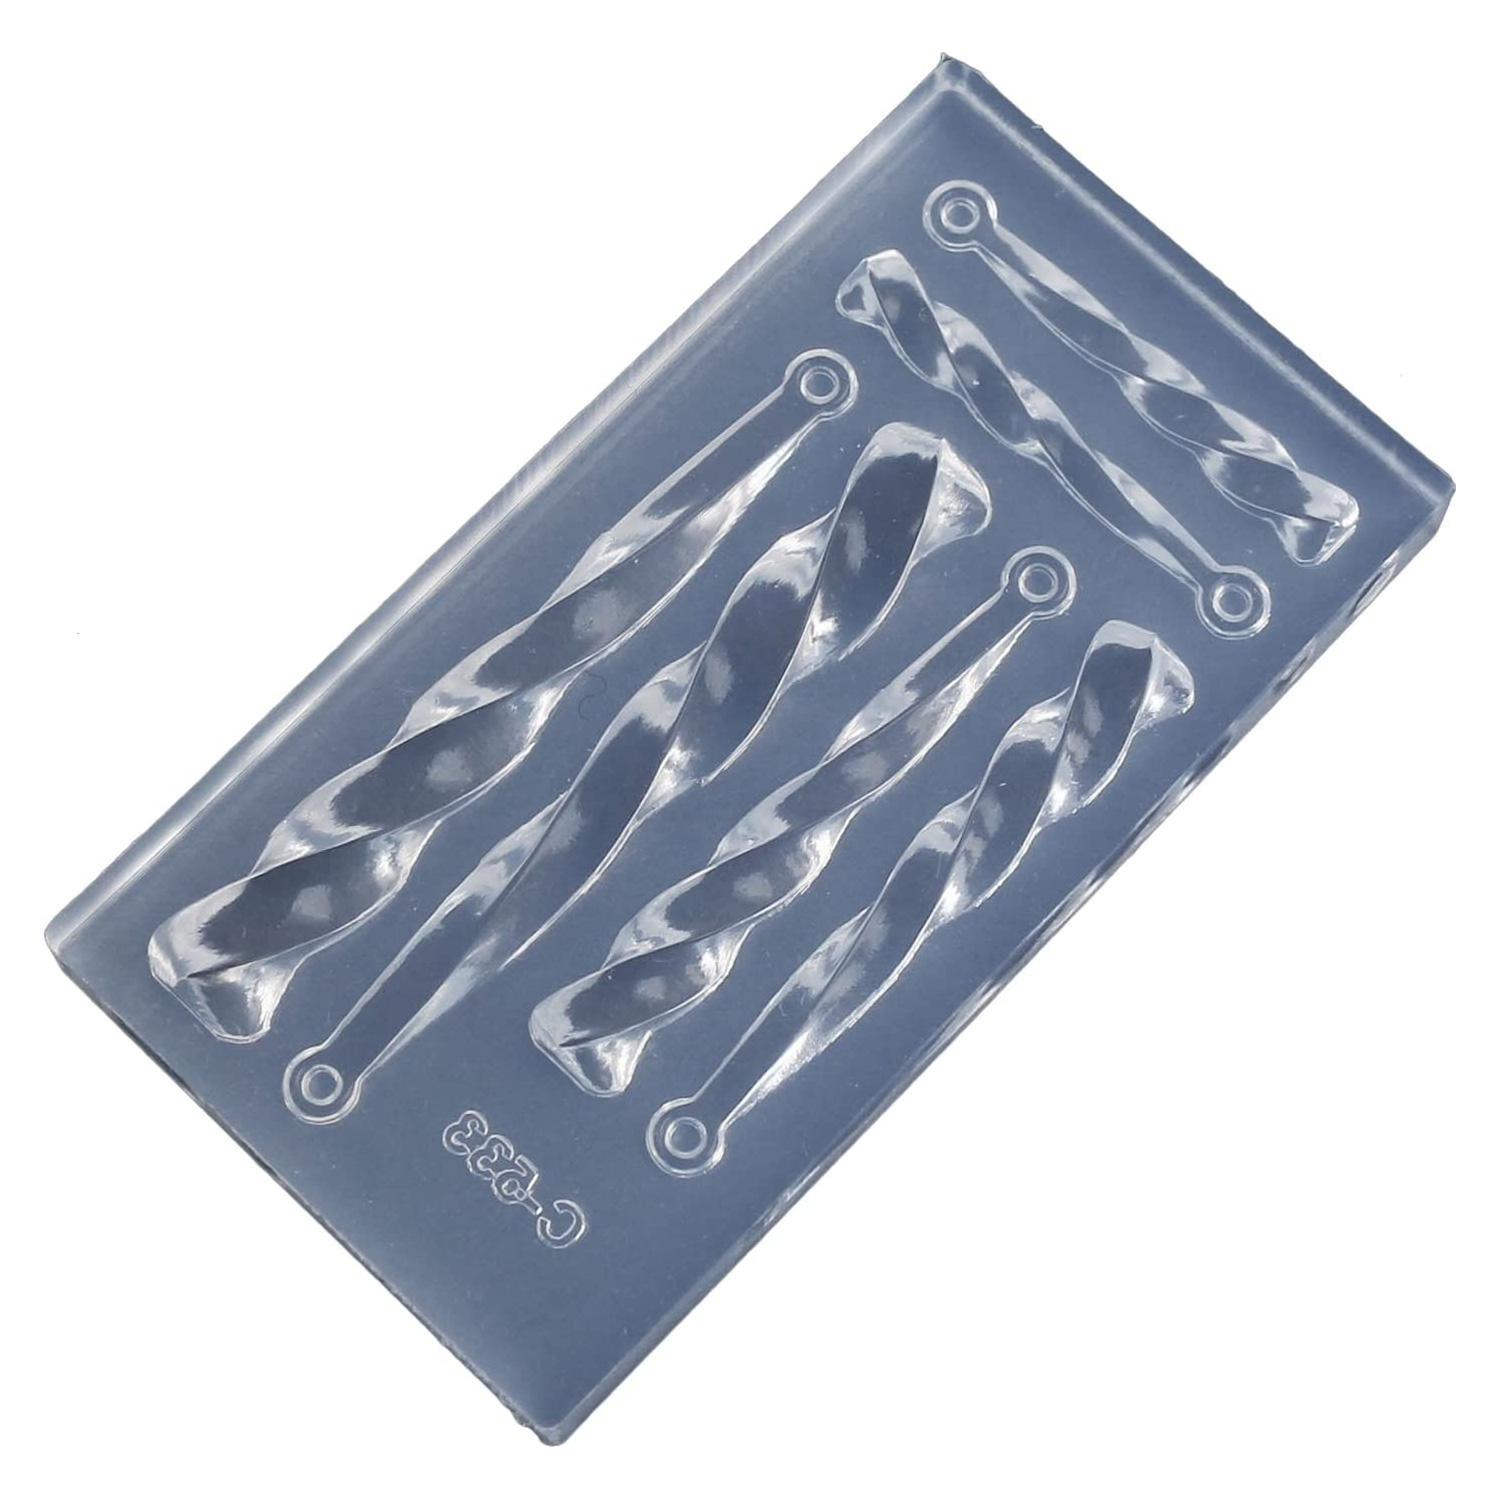 KAM-REJ-533  Resin Crafting Silicone Mold  (pcs)